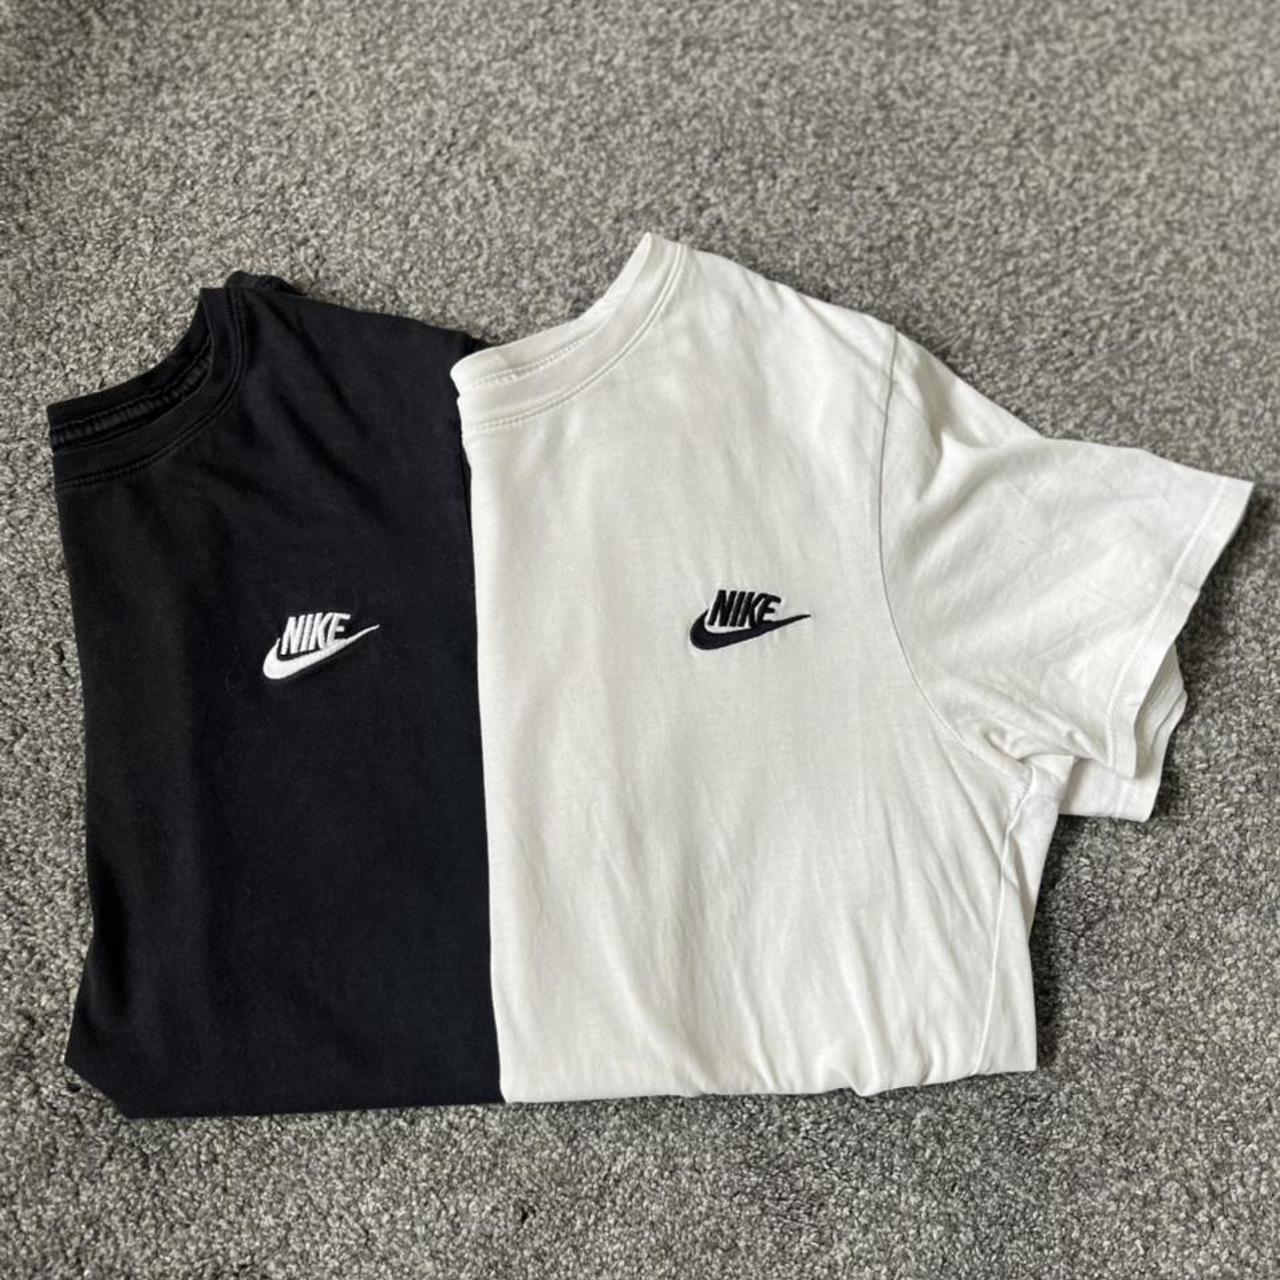 Black and White Nike T-Shirts in size small. £12 for... - Depop